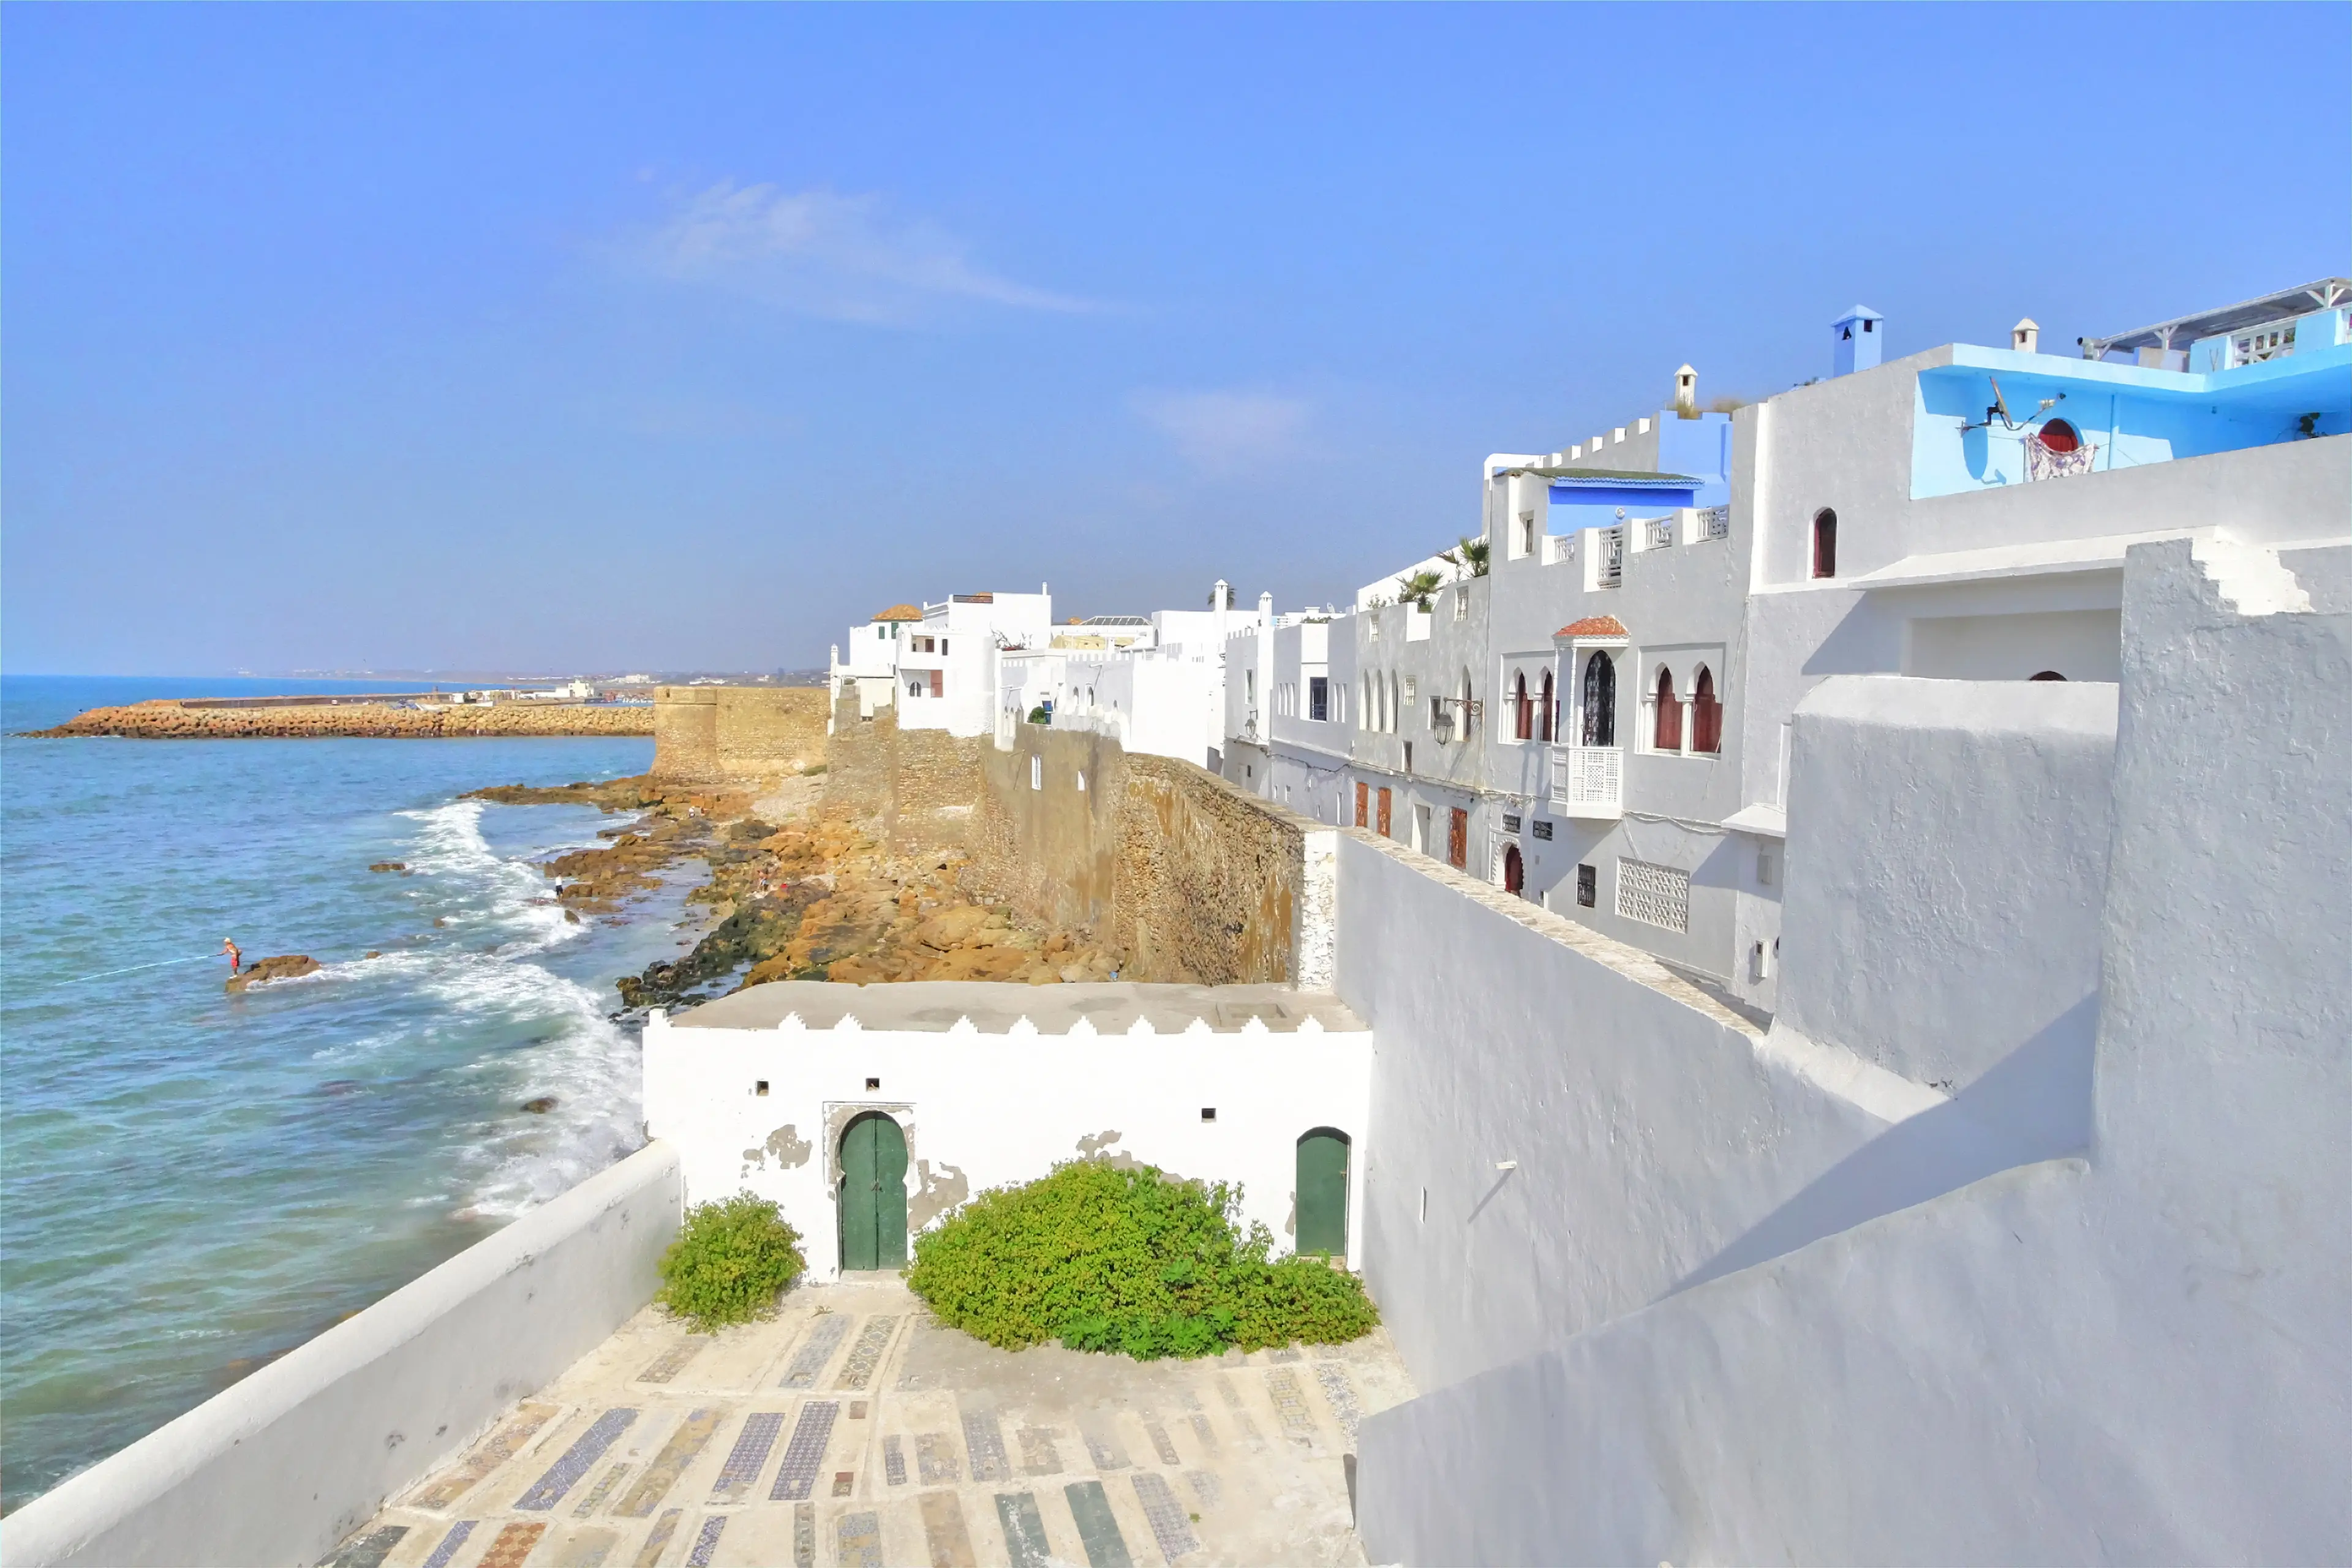 1-Day Solo Outdoor Adventure in Asilah for Locals